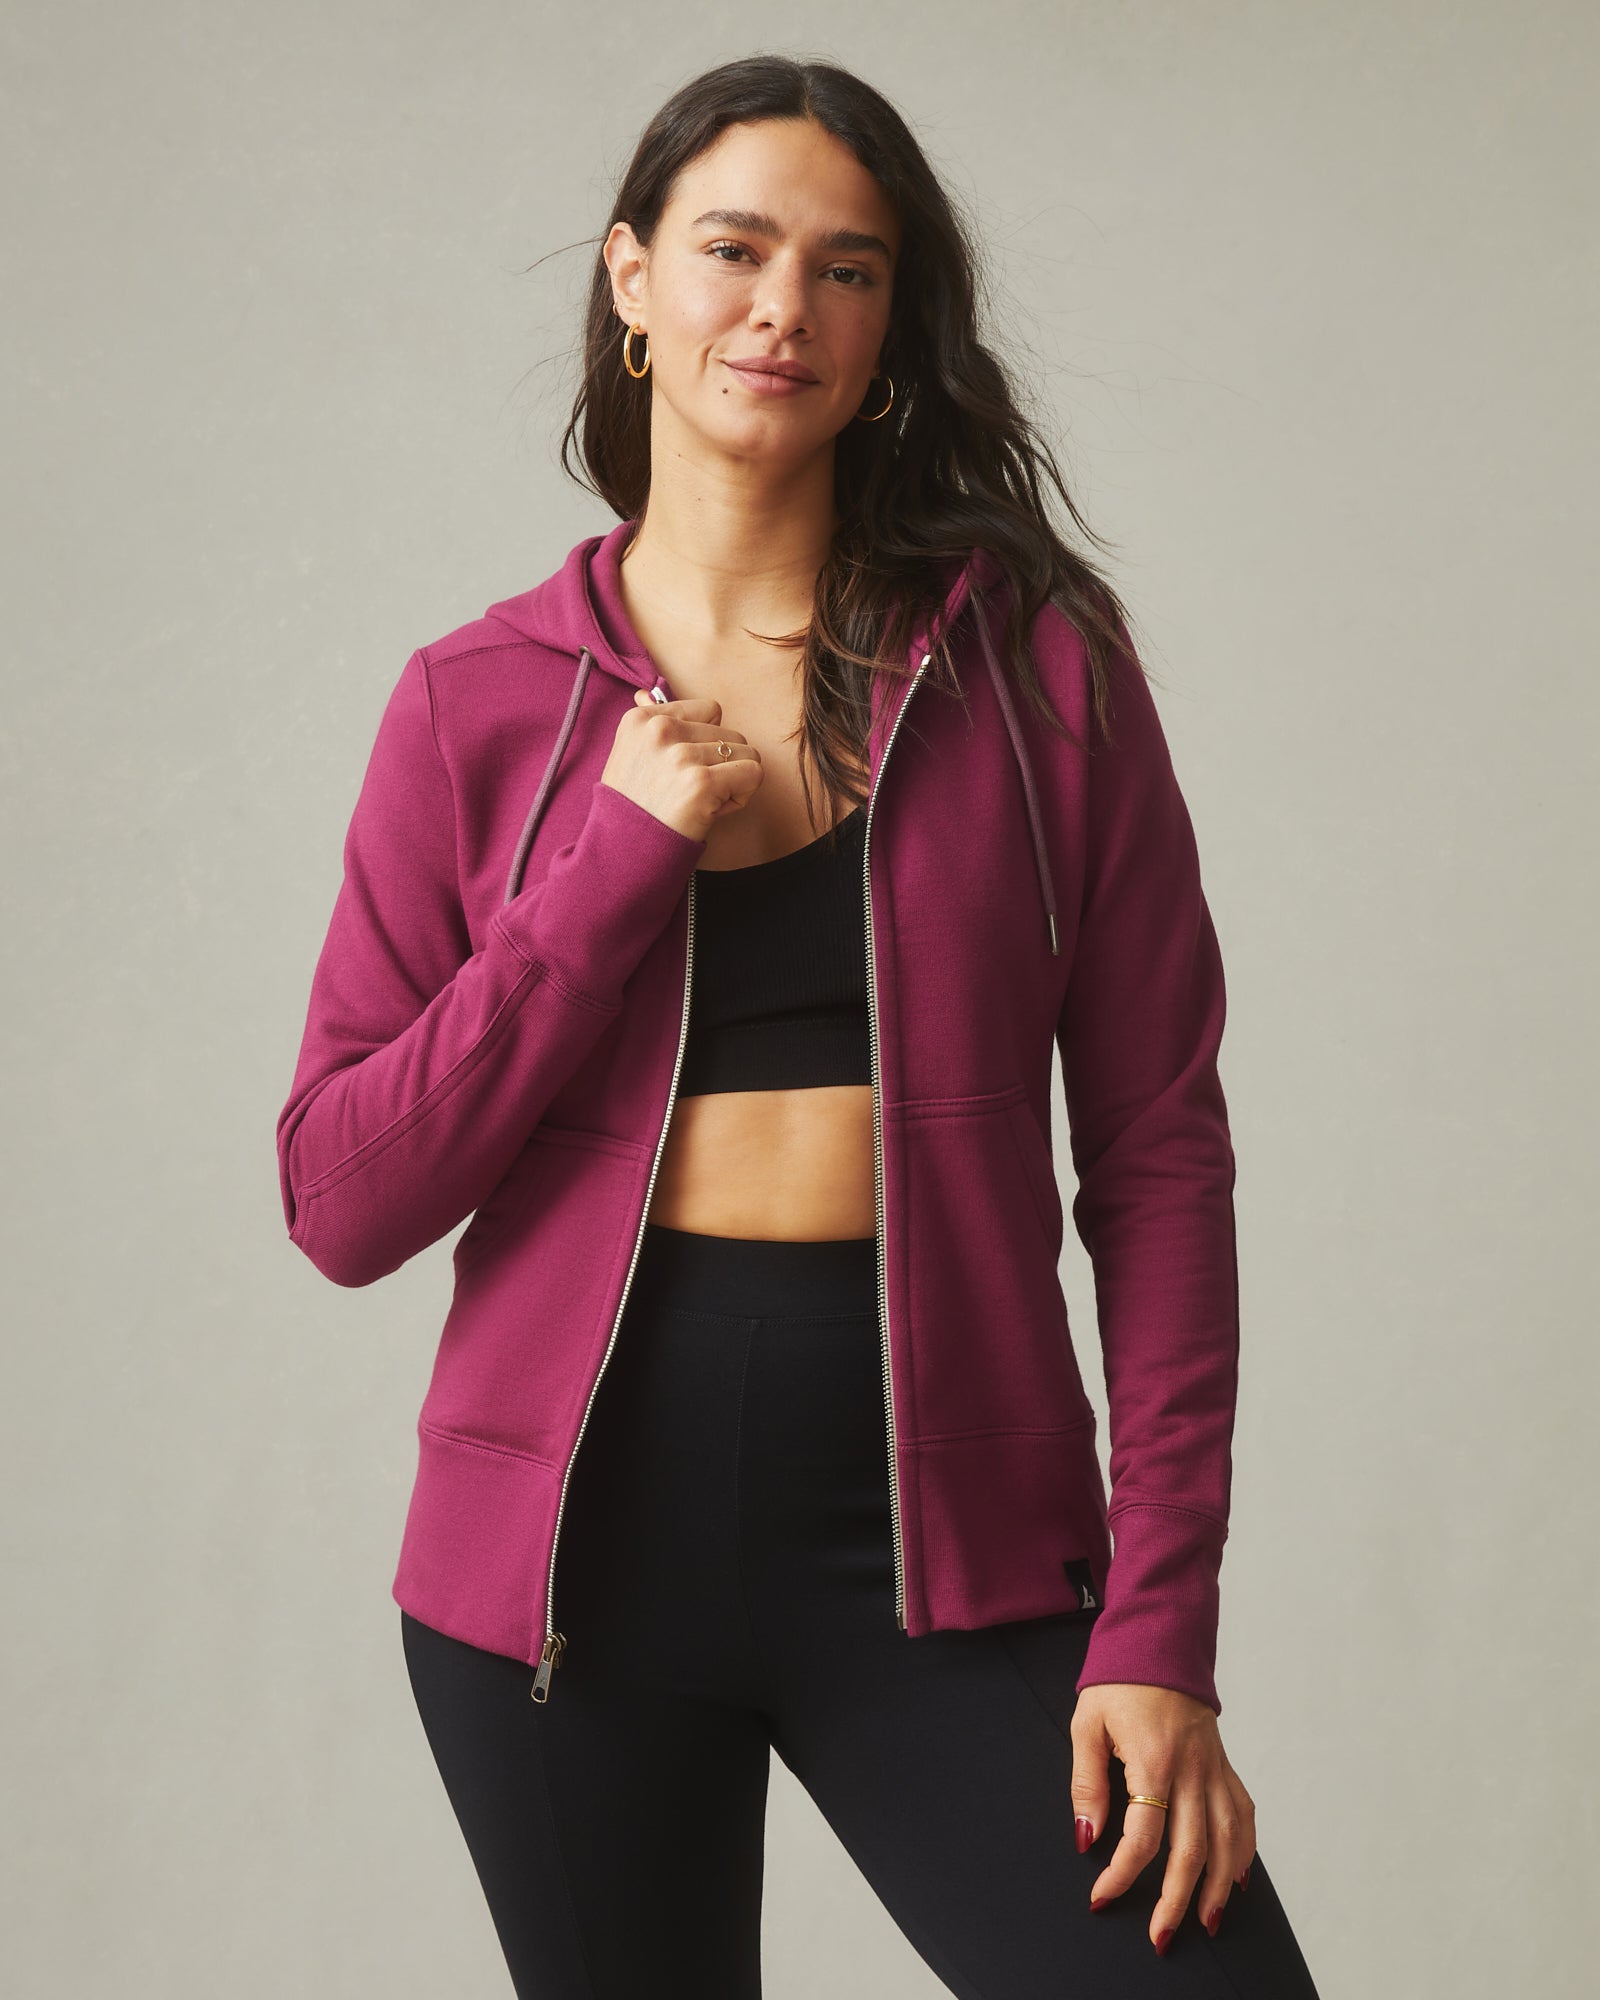 Scuba hoodie size 6, not sure if I should size down to a 4. Thoughts? : r/ lululemon